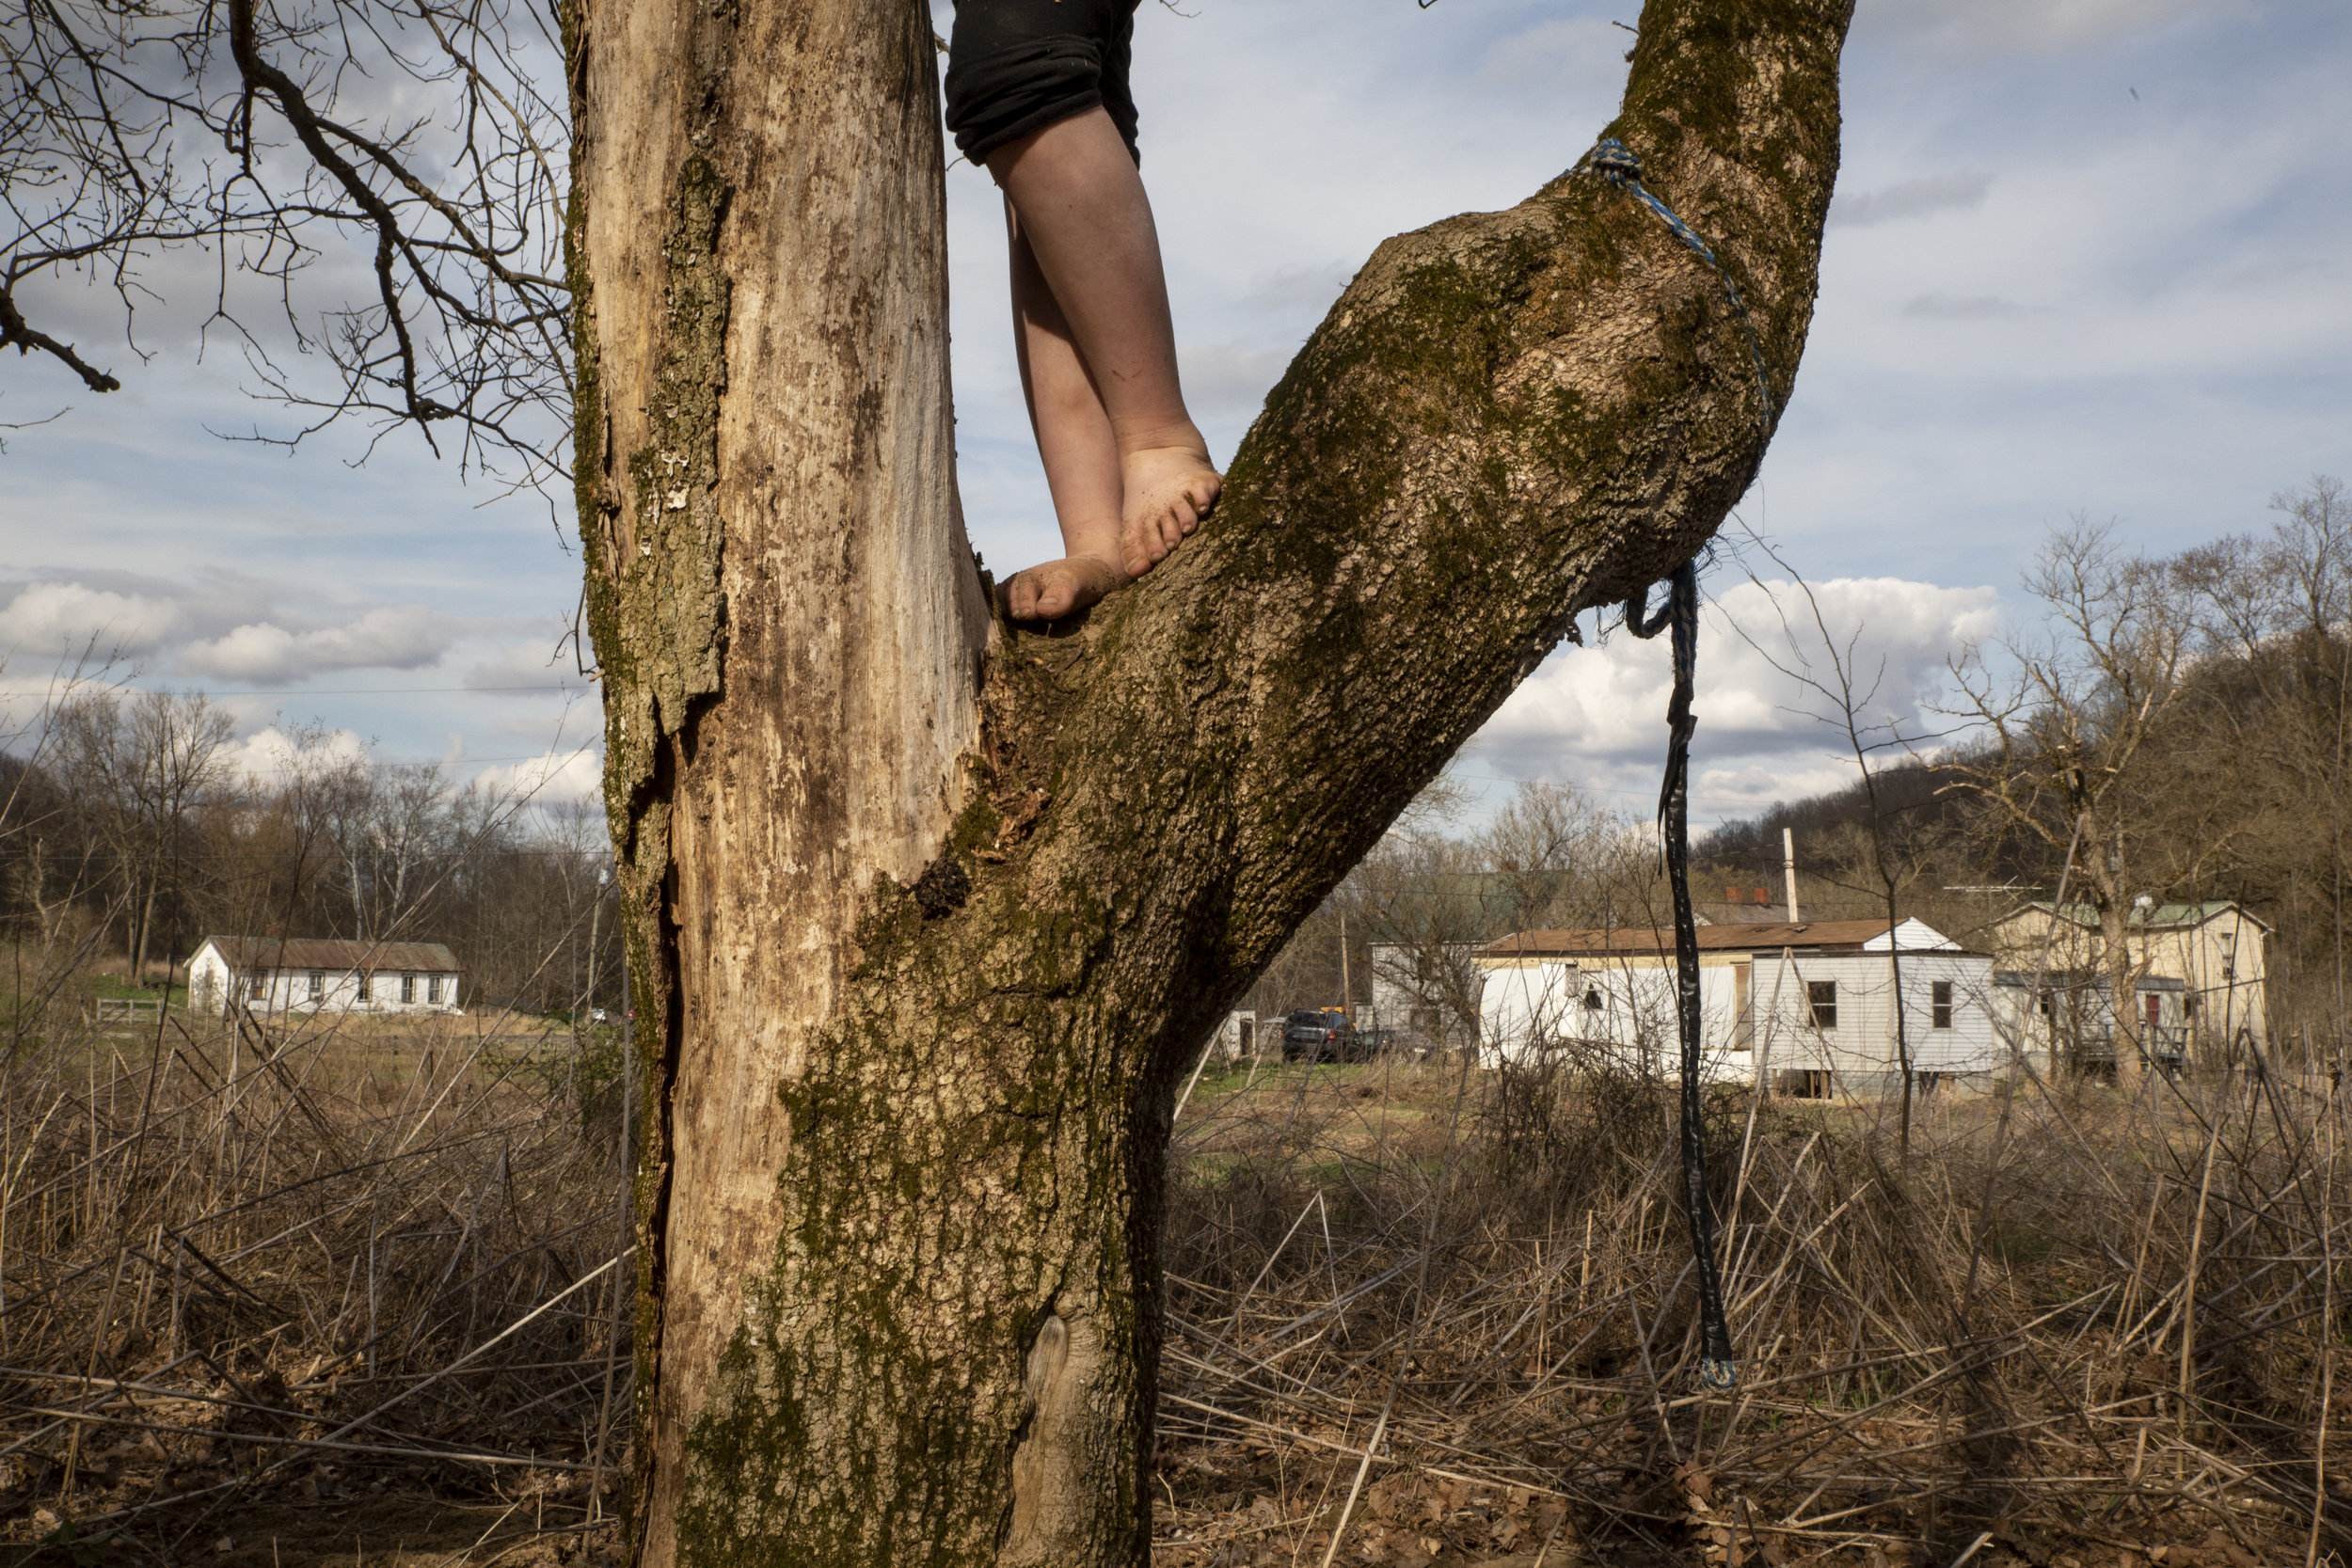  Brooklyn Roof, 6, climbs a tree near her home—a rented trailer in Sharpsburg, Ohio. The Roof family has resided in Sharpsburg for nine years, but worry about their future because the community lies in a flood zone. 